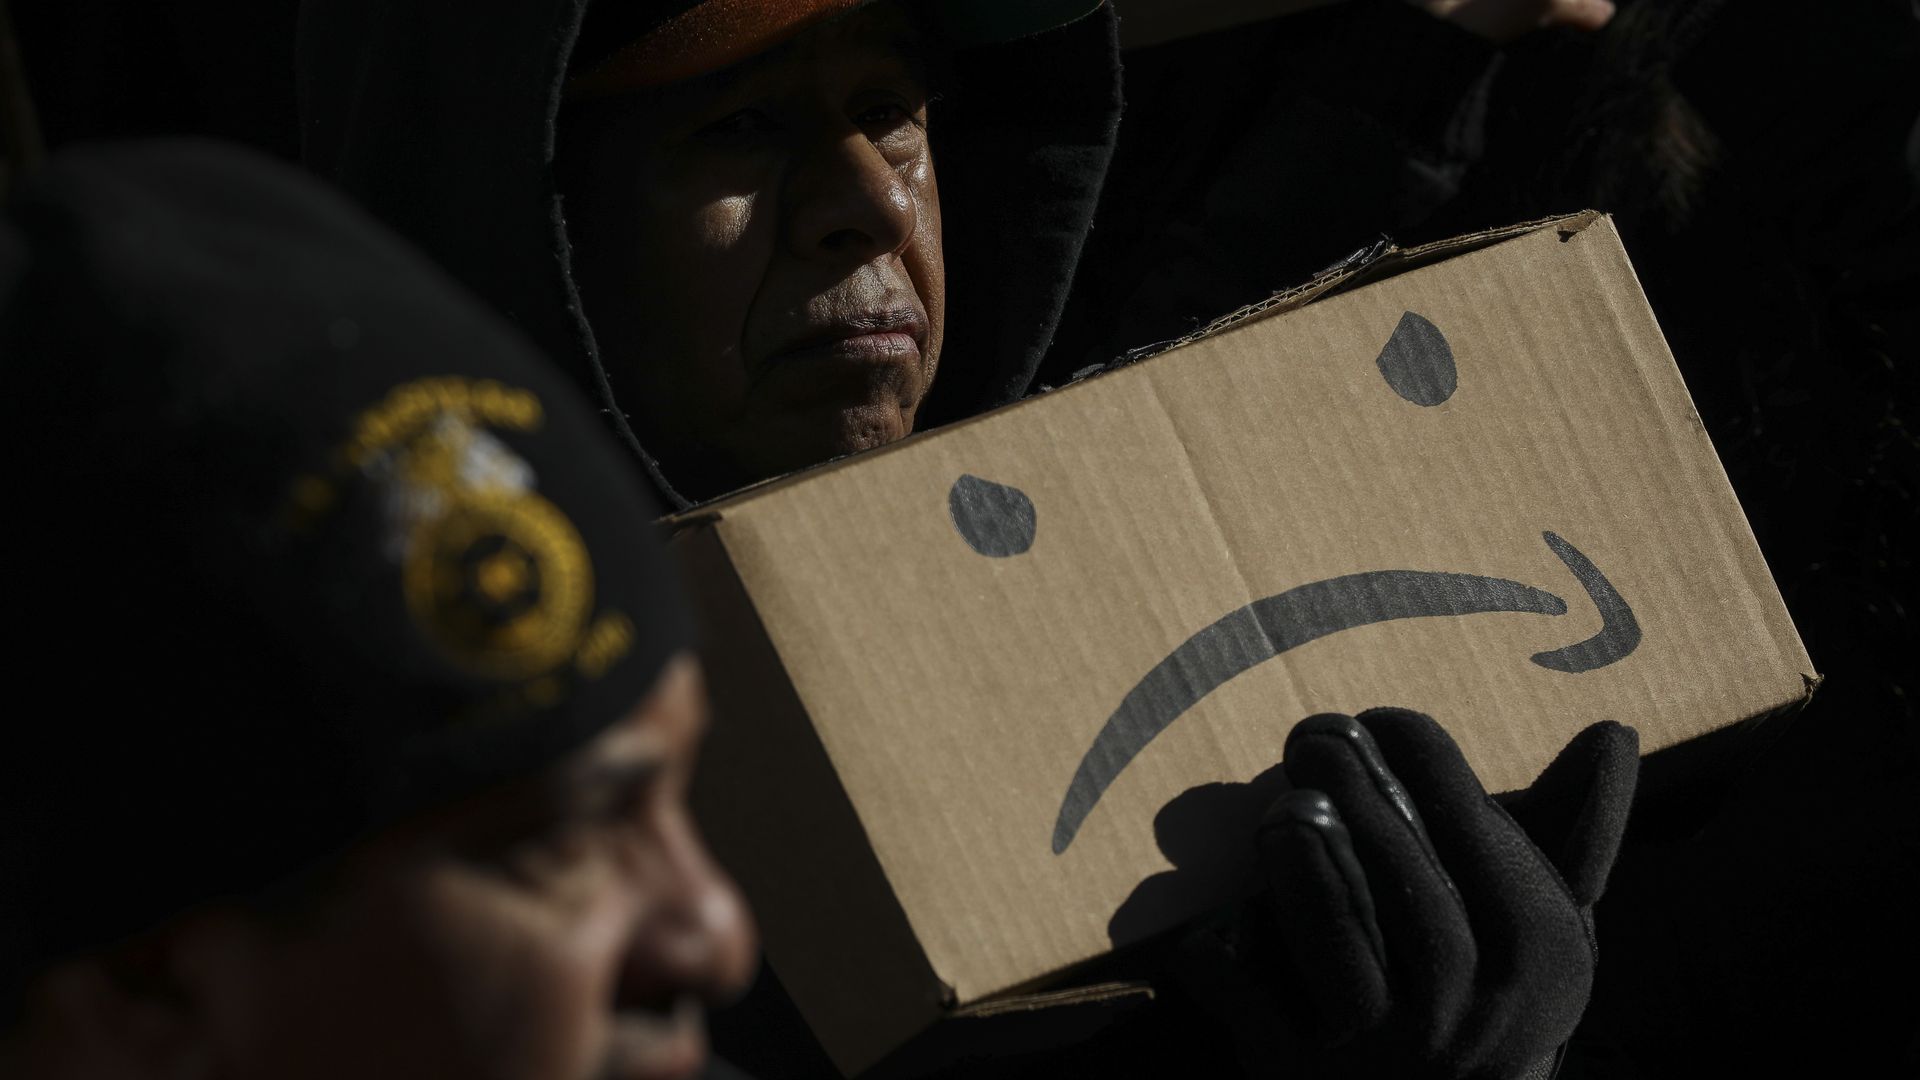 A man holds an upside-down Amazon logo with two eyes, made to look like a sad face